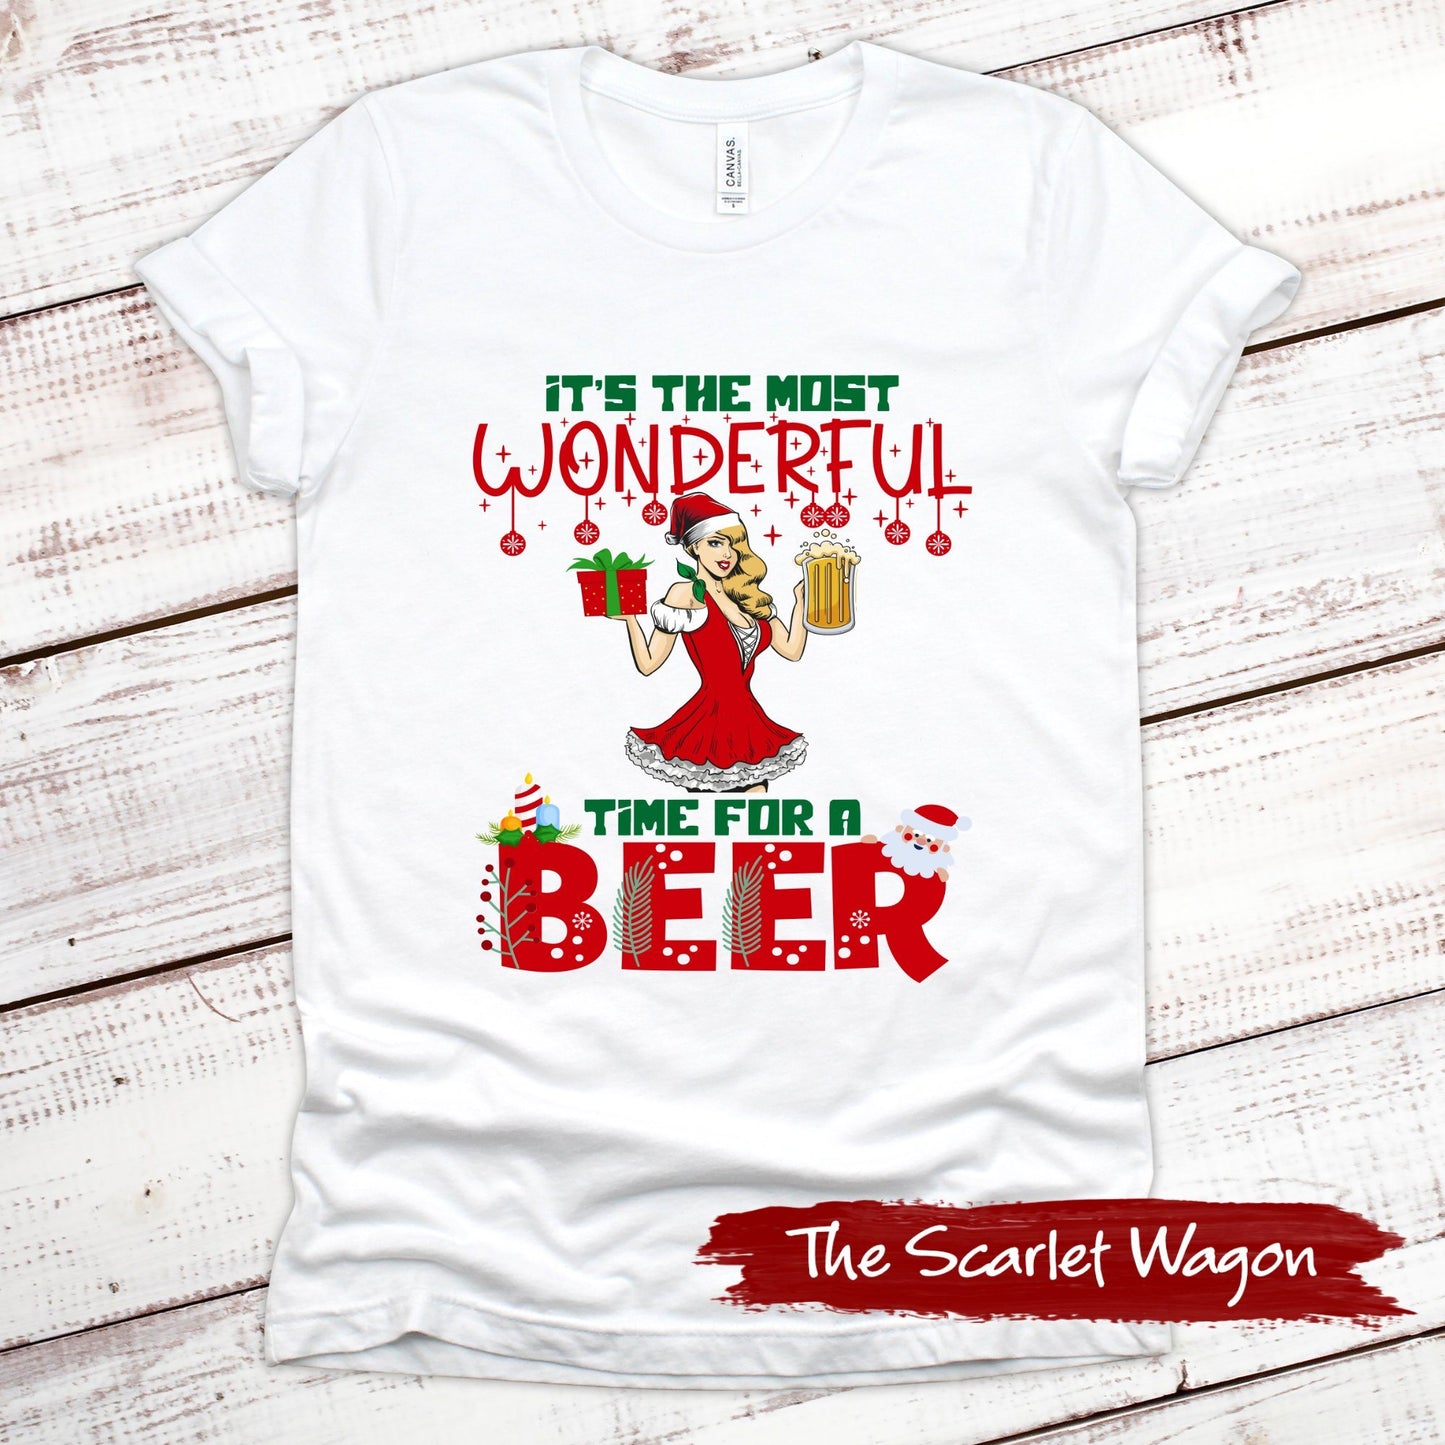 Most Wonderful Time for a Beer Christmas Shirt Scarlet Wagon White XS 